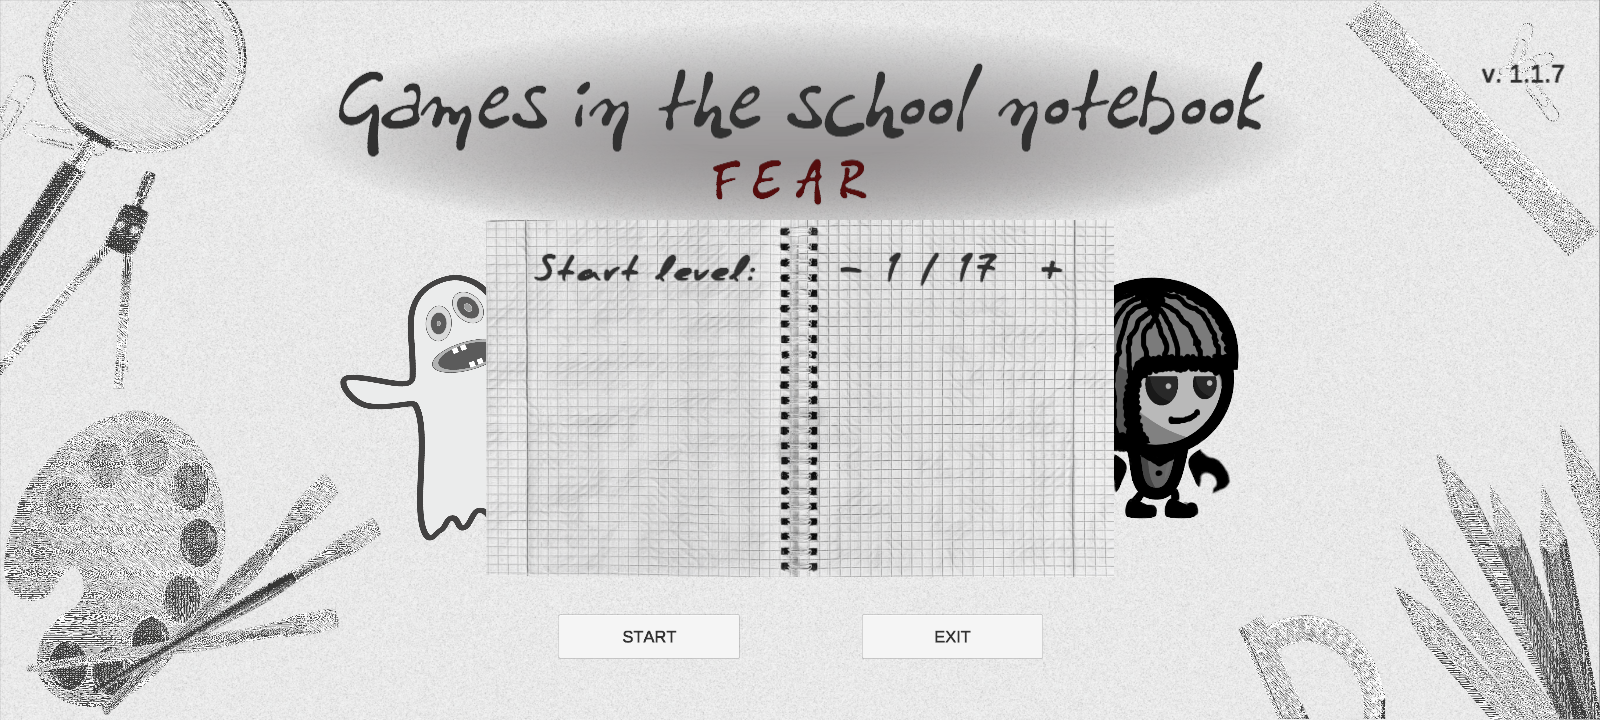 The Fear 2 - Download do APK para Android